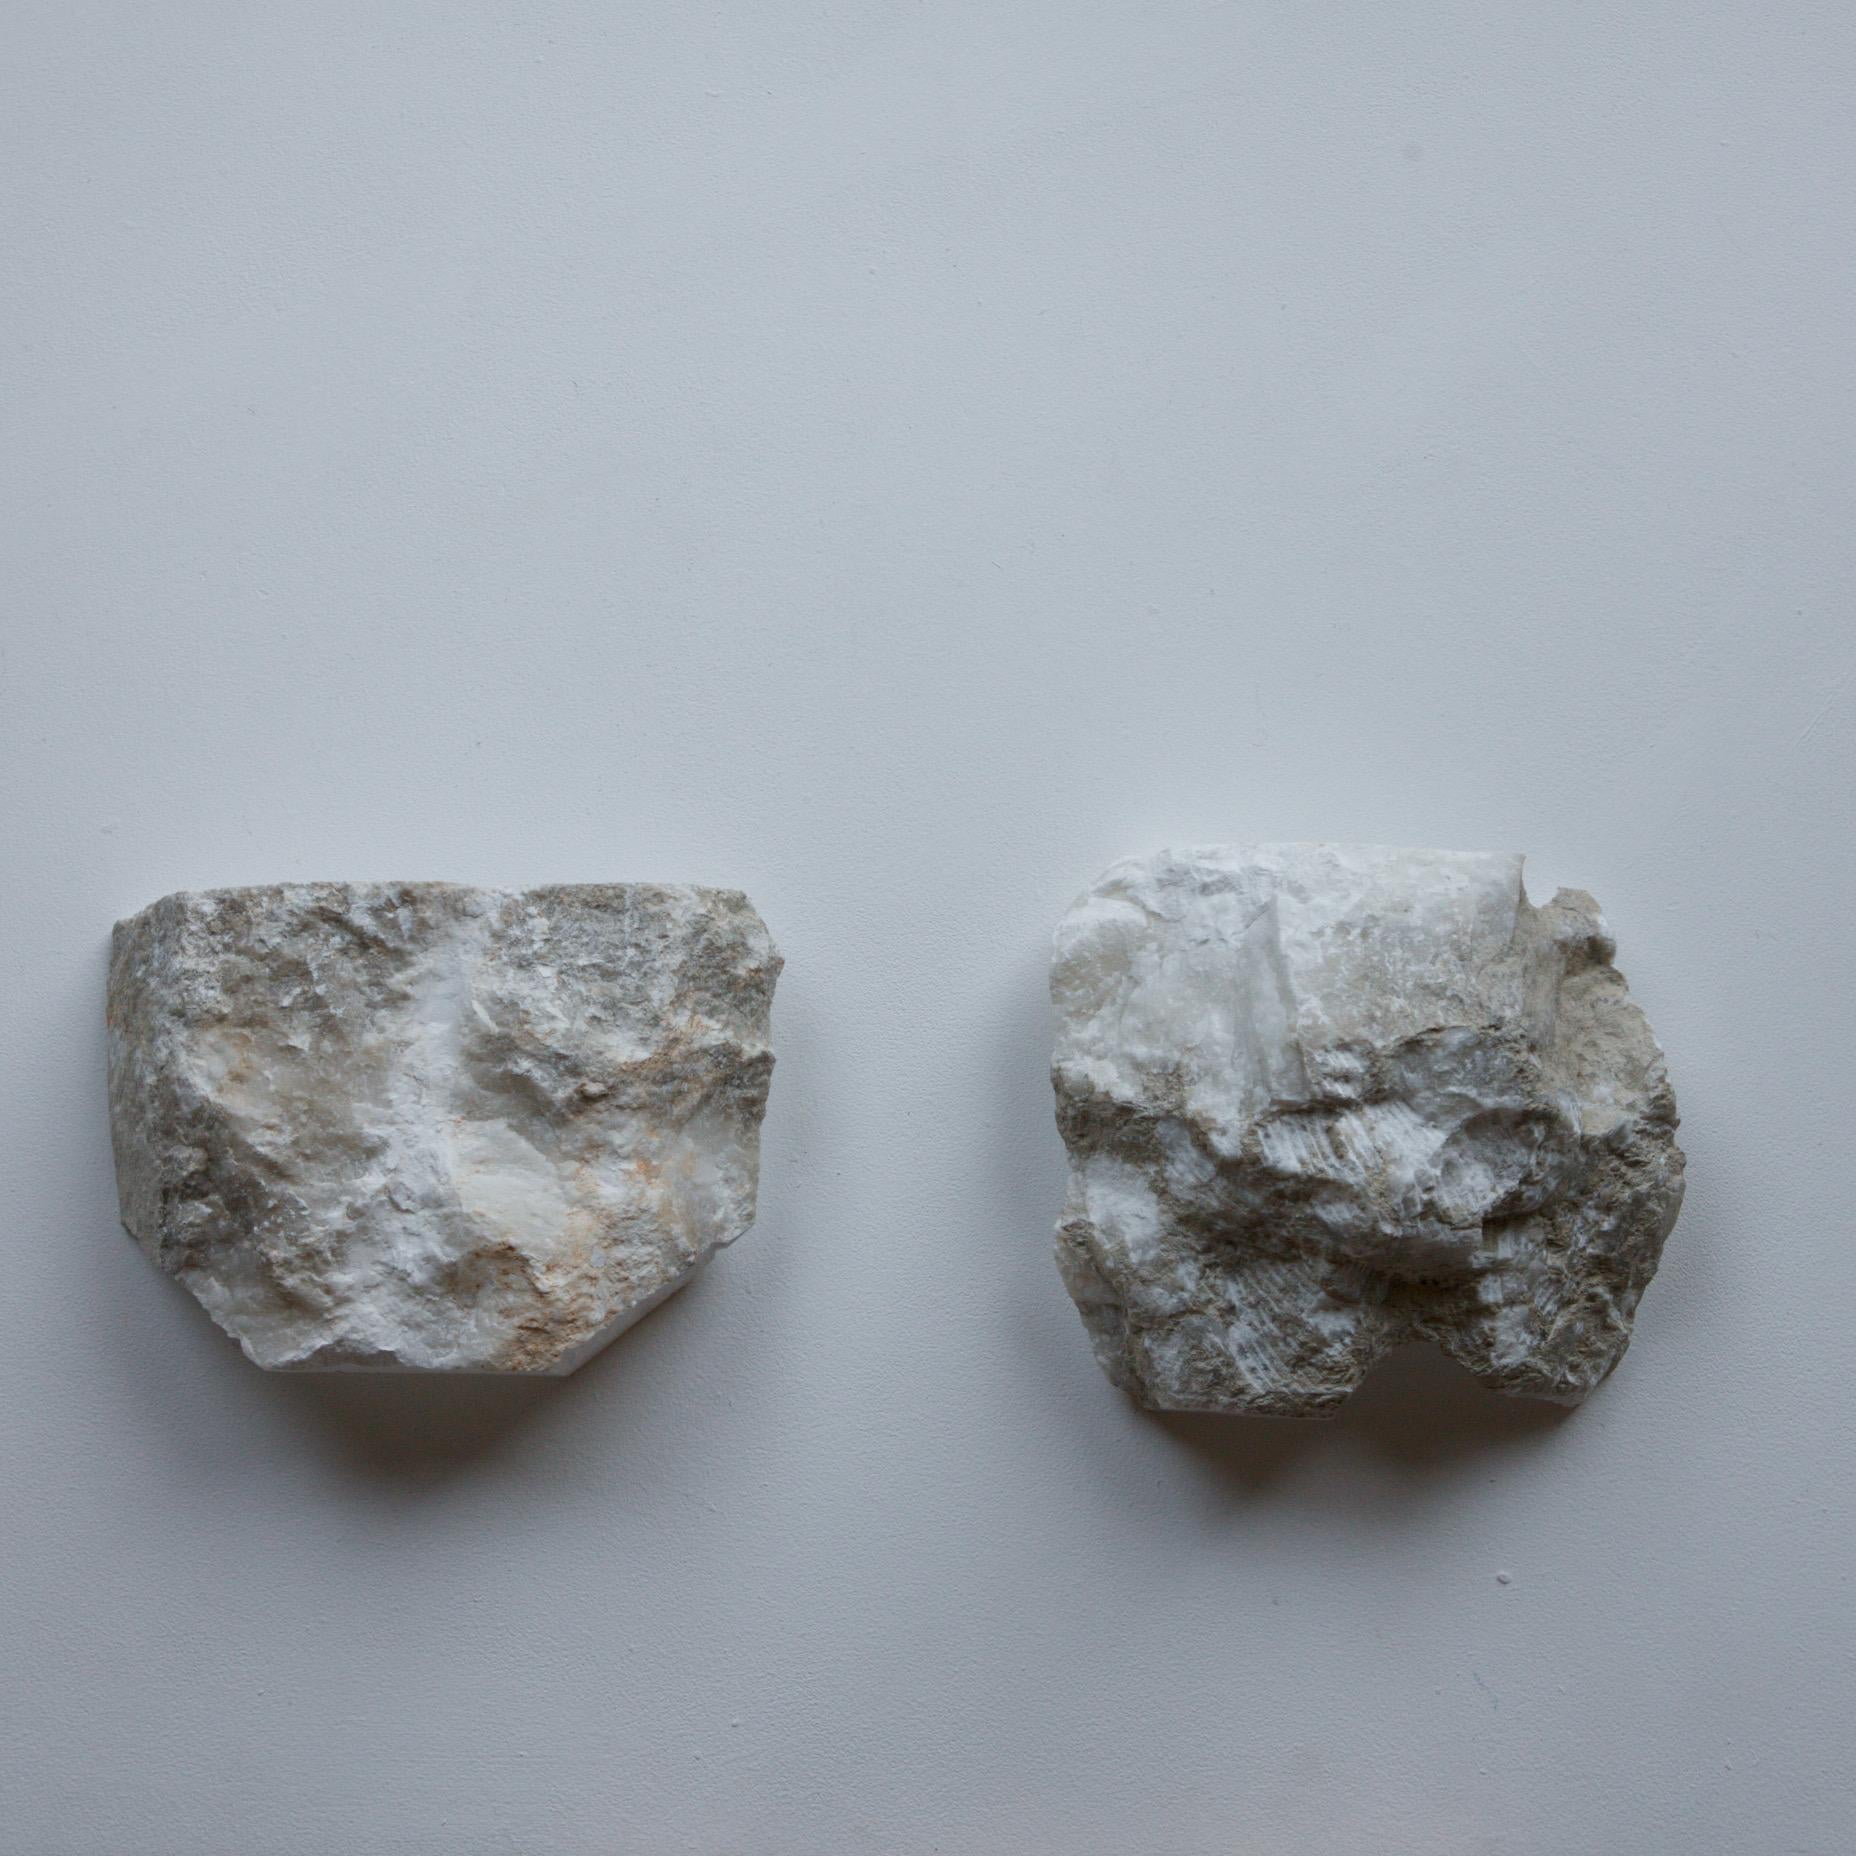 A large pair of brutalist stone wall sconces in marble. The raw edge has been celebrated here and the internal sconce has been carved out and a wall fixing inserted. The sconces are to be hung over existing light fittings. They glow when